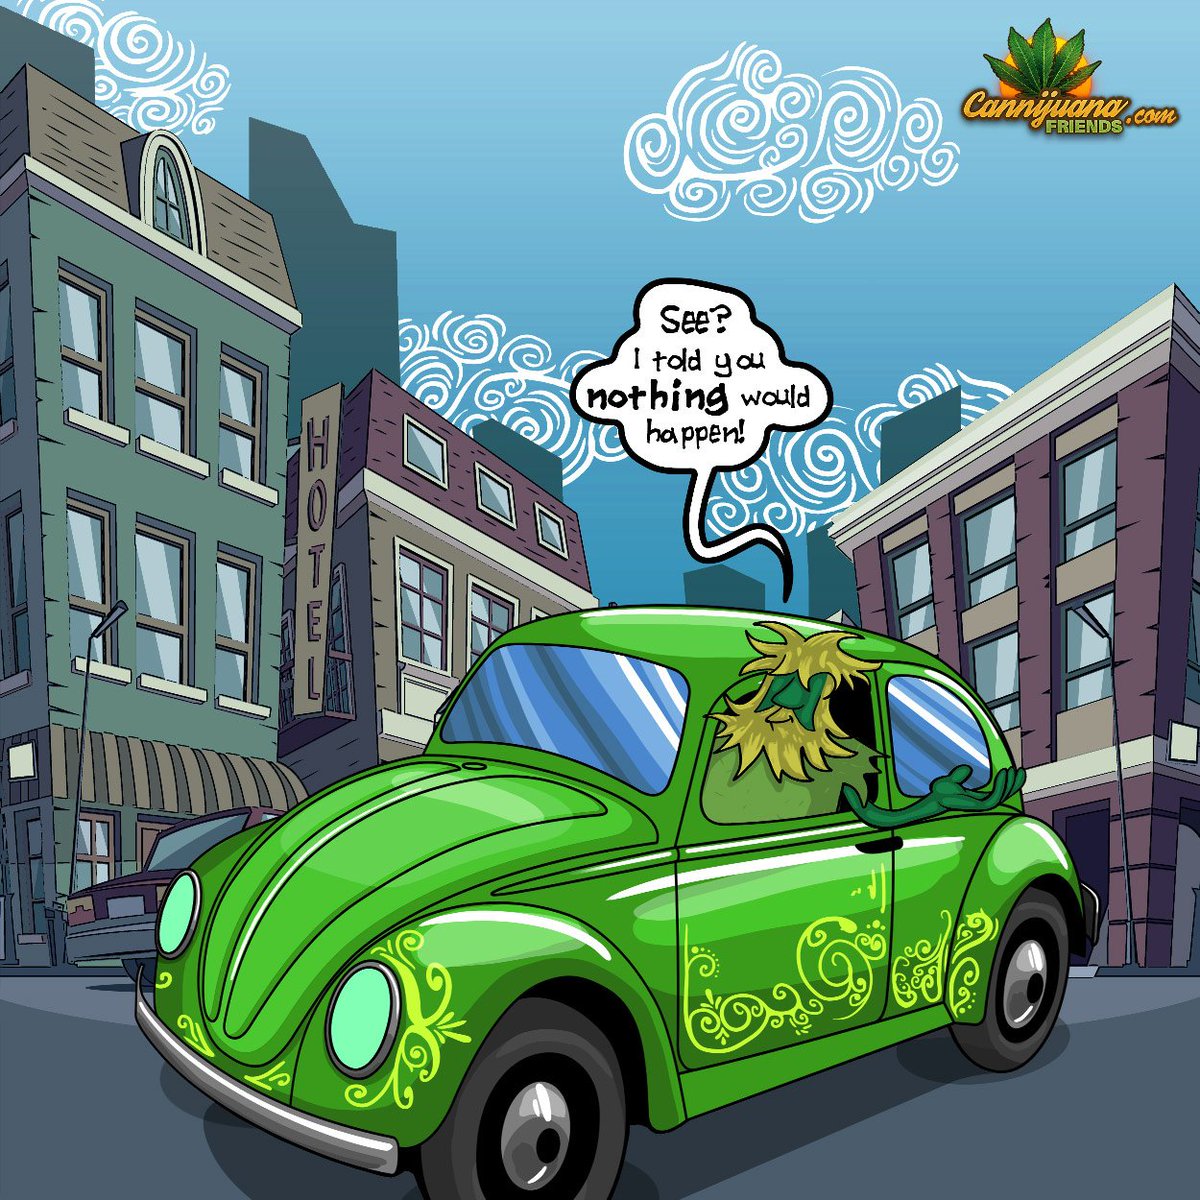 For a nation that ran out of weed a month after legalizing it, no impaired driving reports! Cannabis 1, Alcohol 0

cannijuanafriends.com/blog/cannabis-…

#CannabisvsAlcohol #CannabisLegalization #canadacannabis #CanadaLegalization #ImpairedDriving